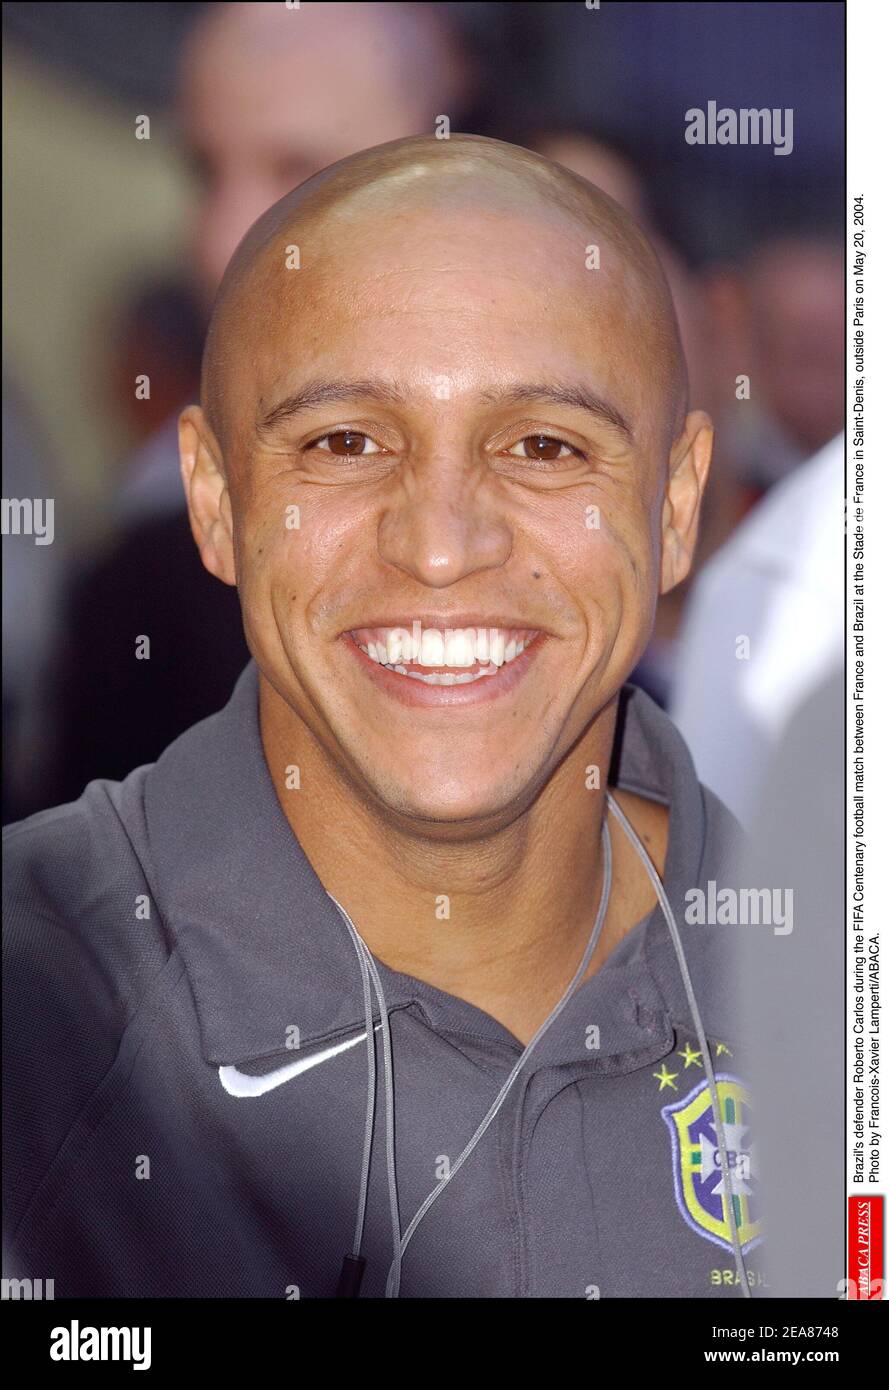 Brazil's defender Roberto Carlos during the FIFA Centenary football match between France and Brazil at the Stade de France in Saint-Denis, outside Paris on May 20, 2004. Photo by Francois-Xavier Lamperti/ABACA. Stock Photo